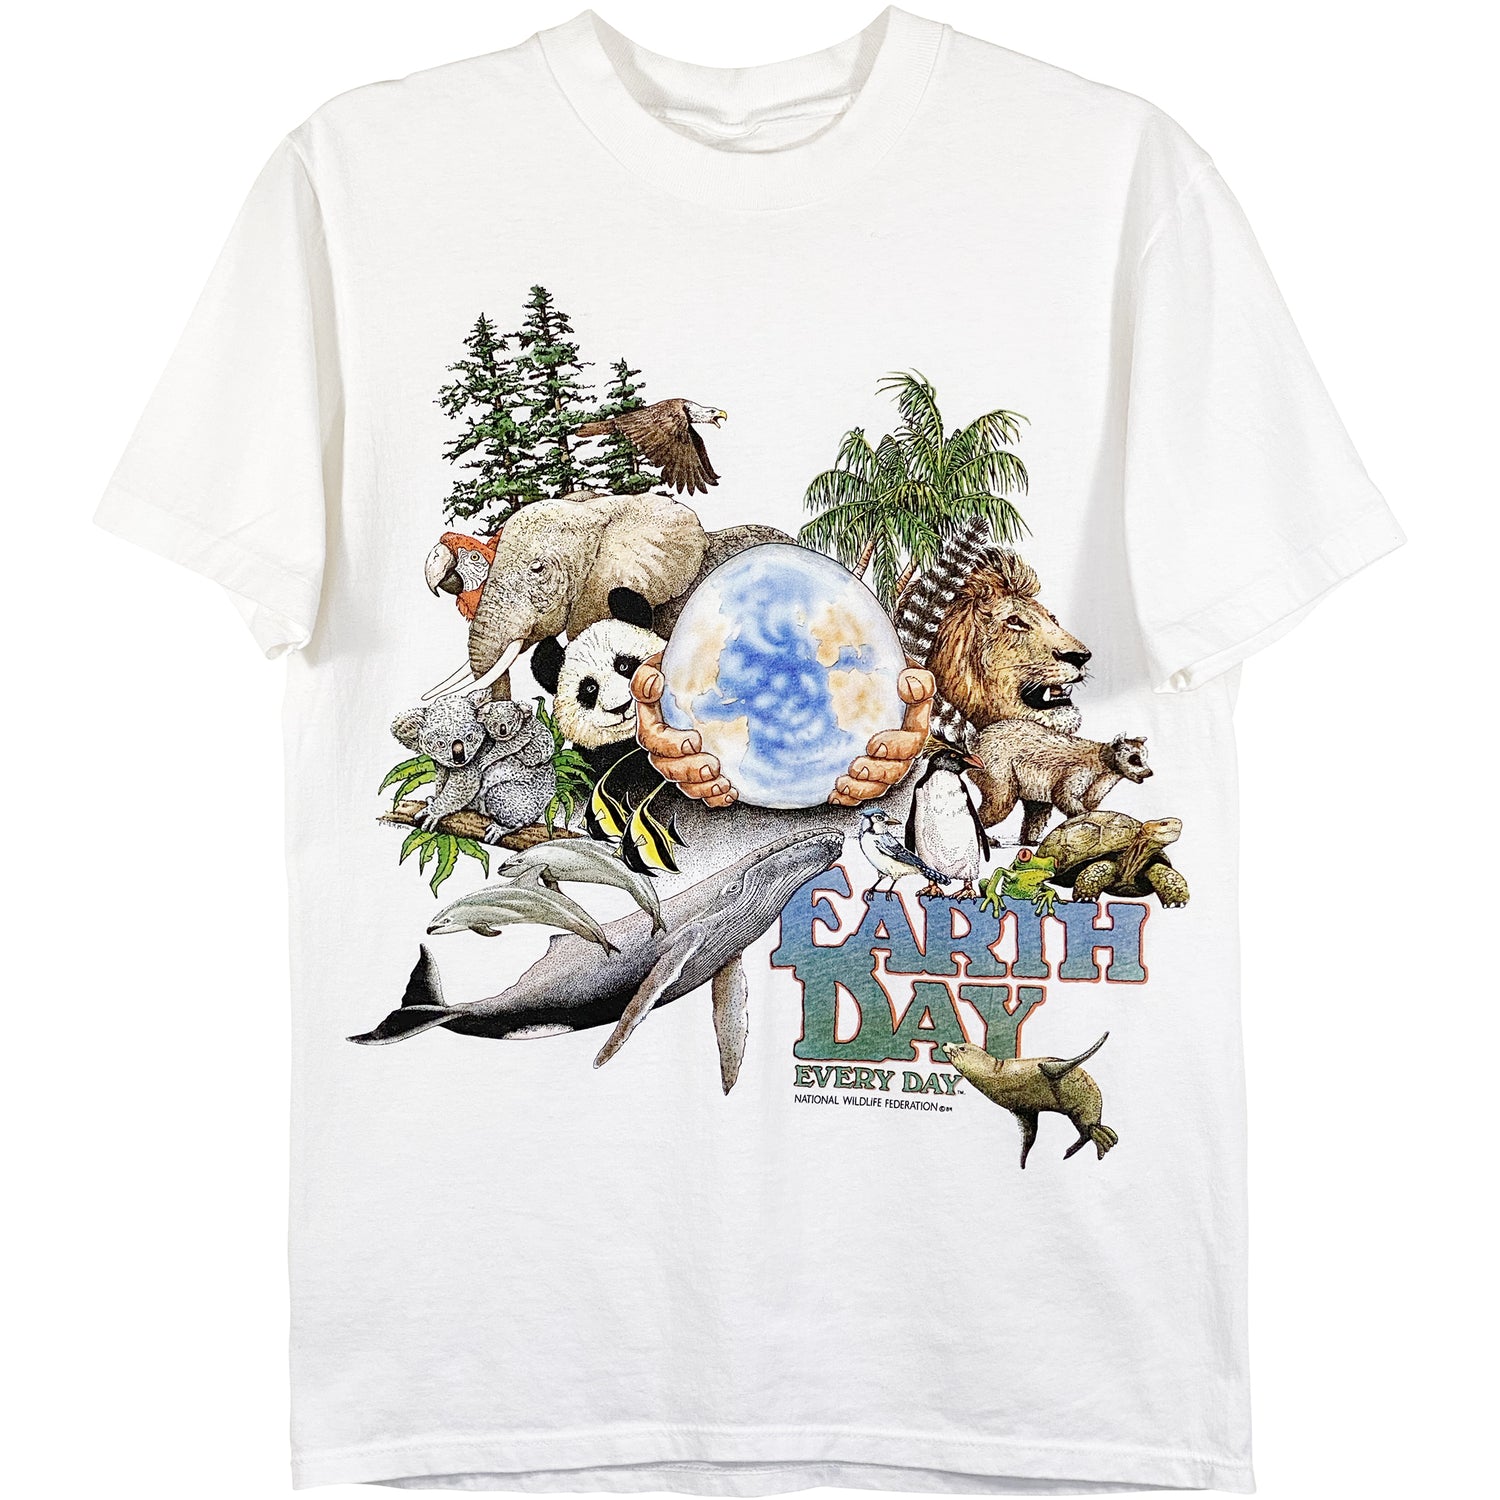 VINTAGE EARTH DAY TEE